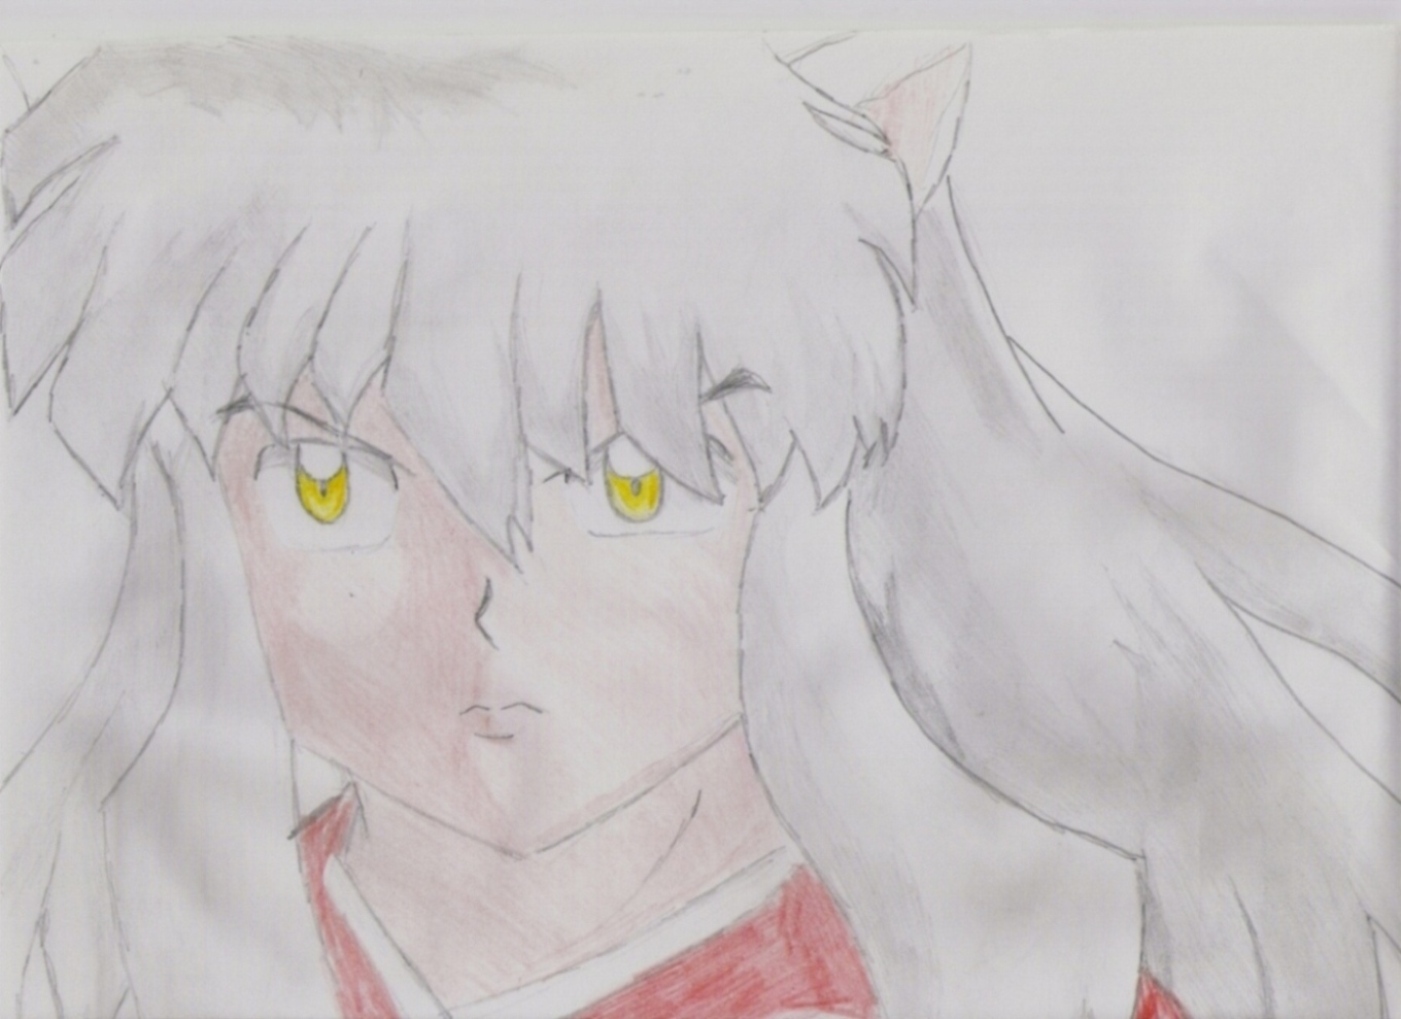 Inuyasha by nmsp88